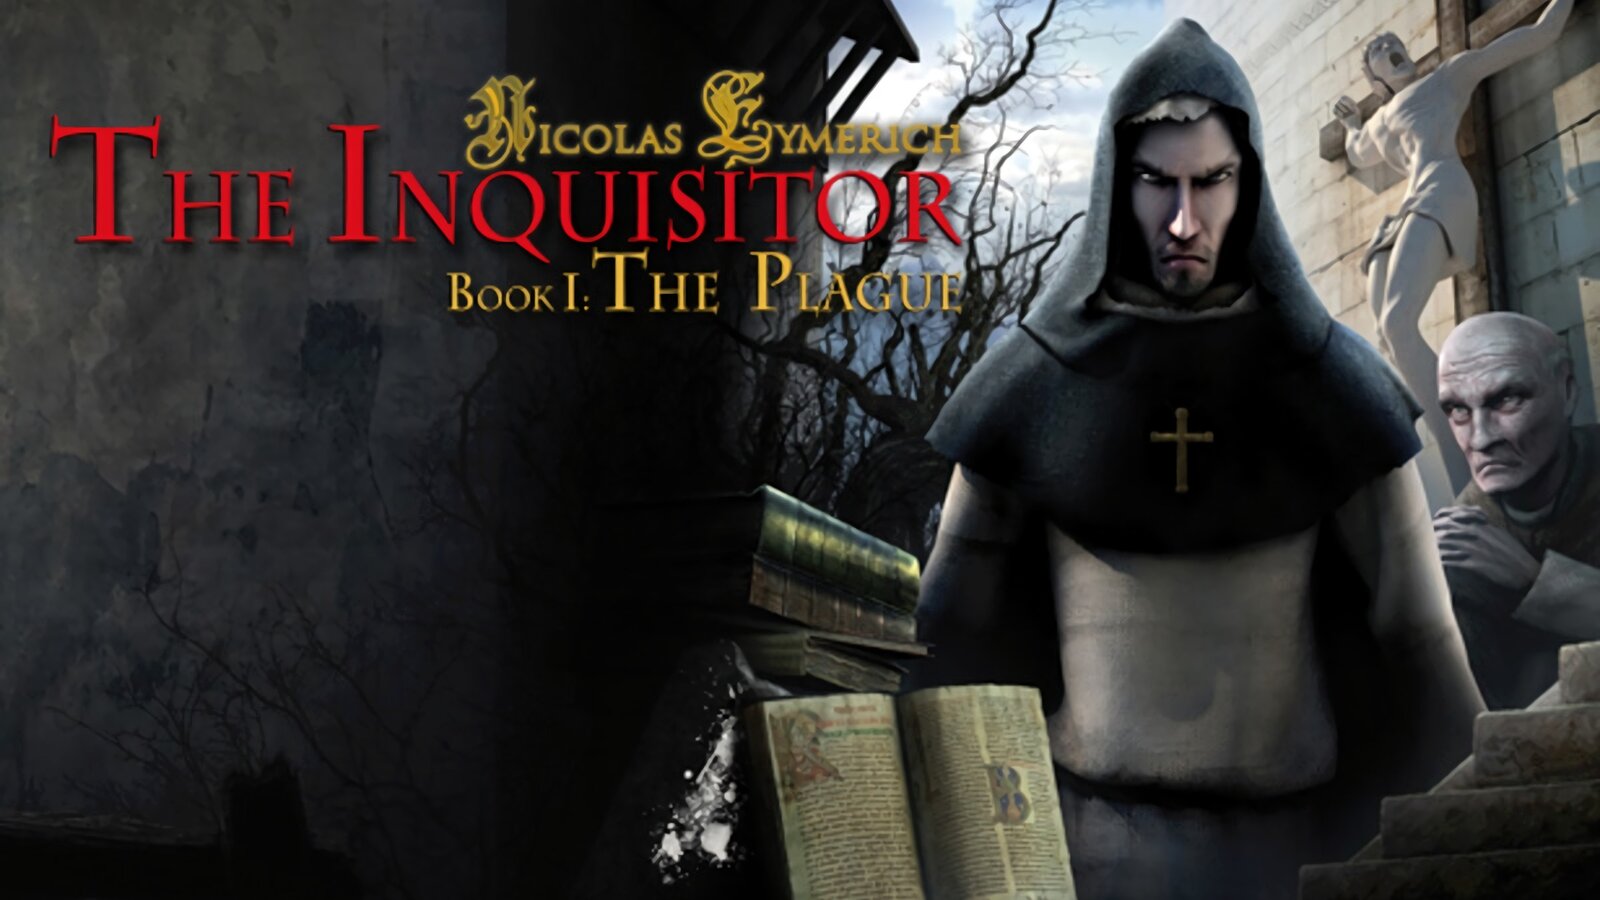 Nicolas Eymerich - The Inquisitor - Book 1: The Plague